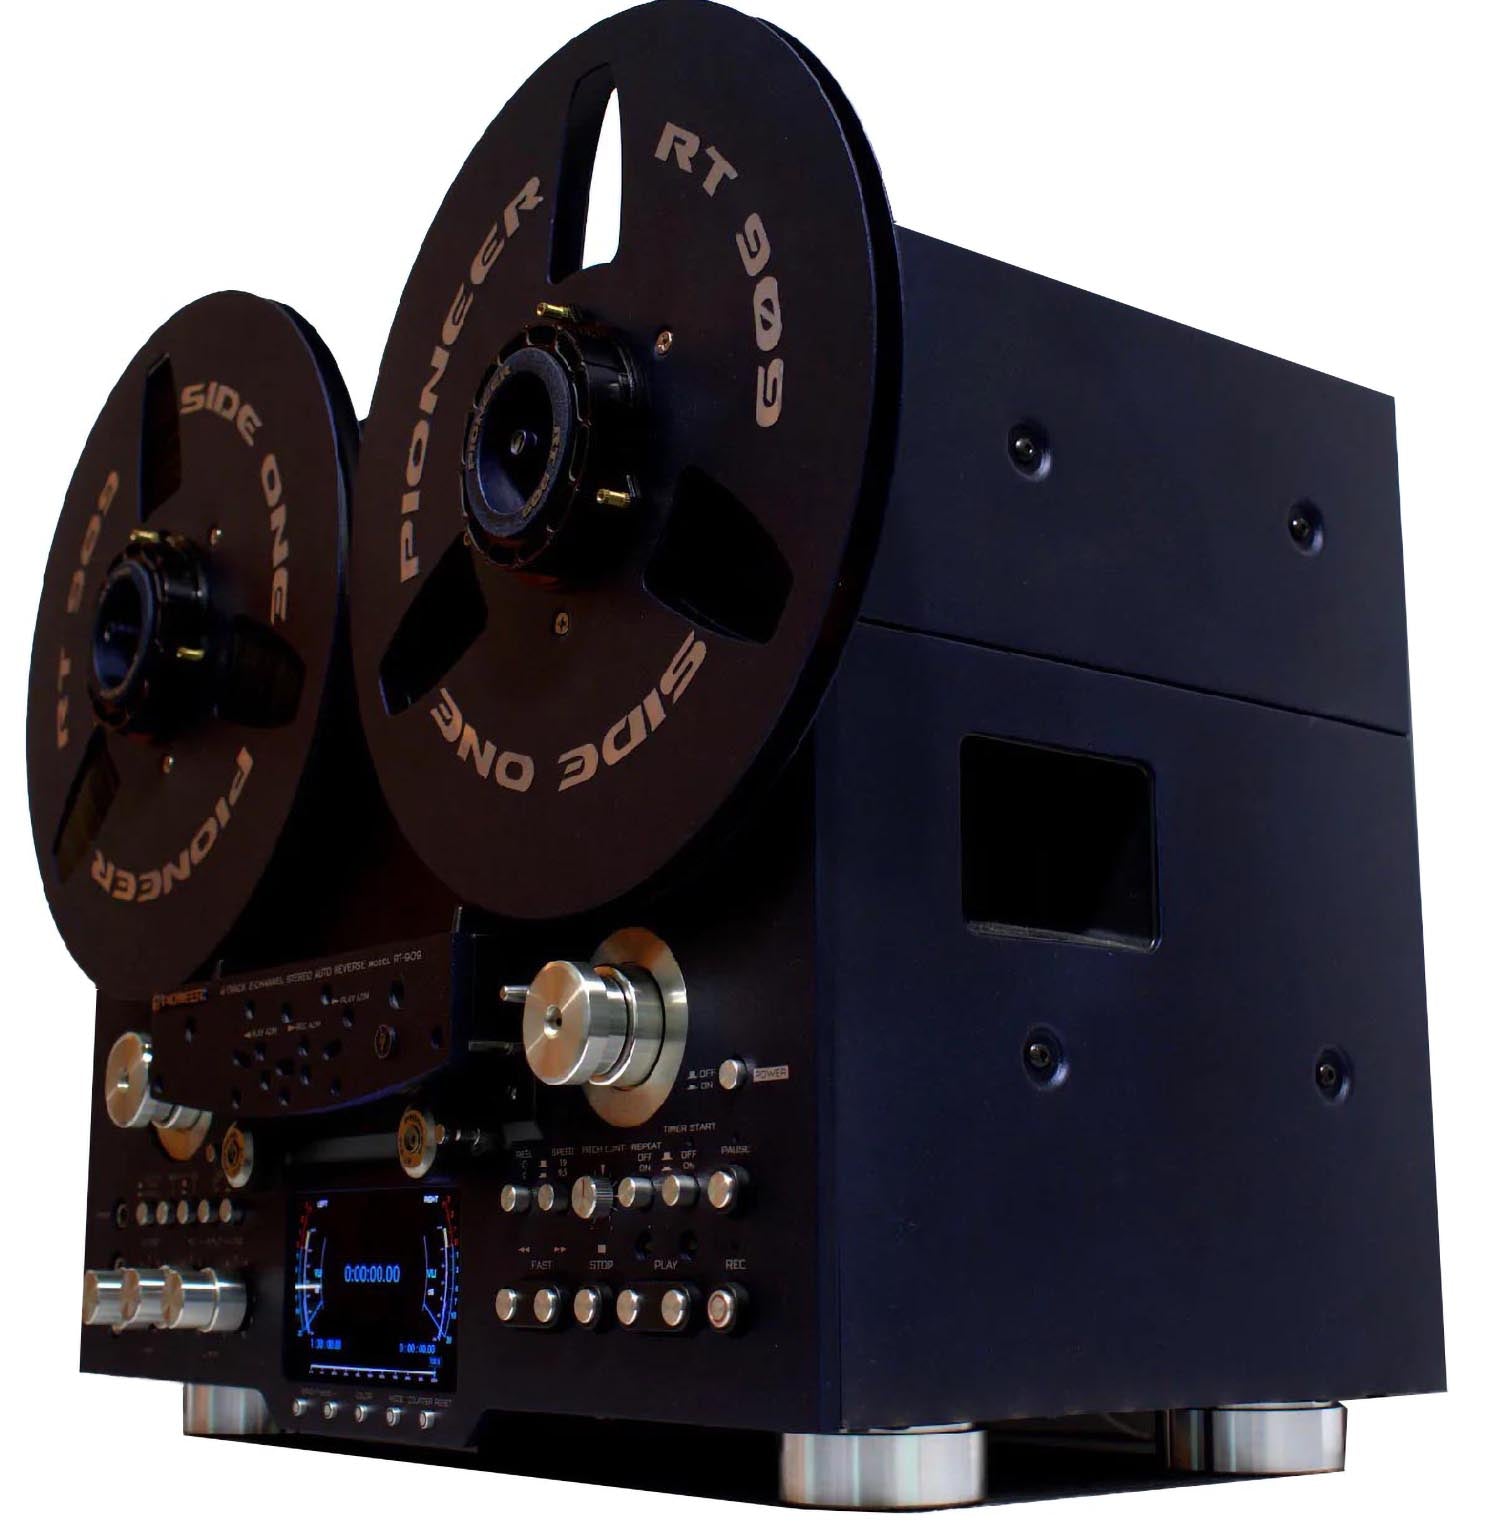 Alter Ego Appearance: Pioneer - Reel to Reel Players For Sale - RX